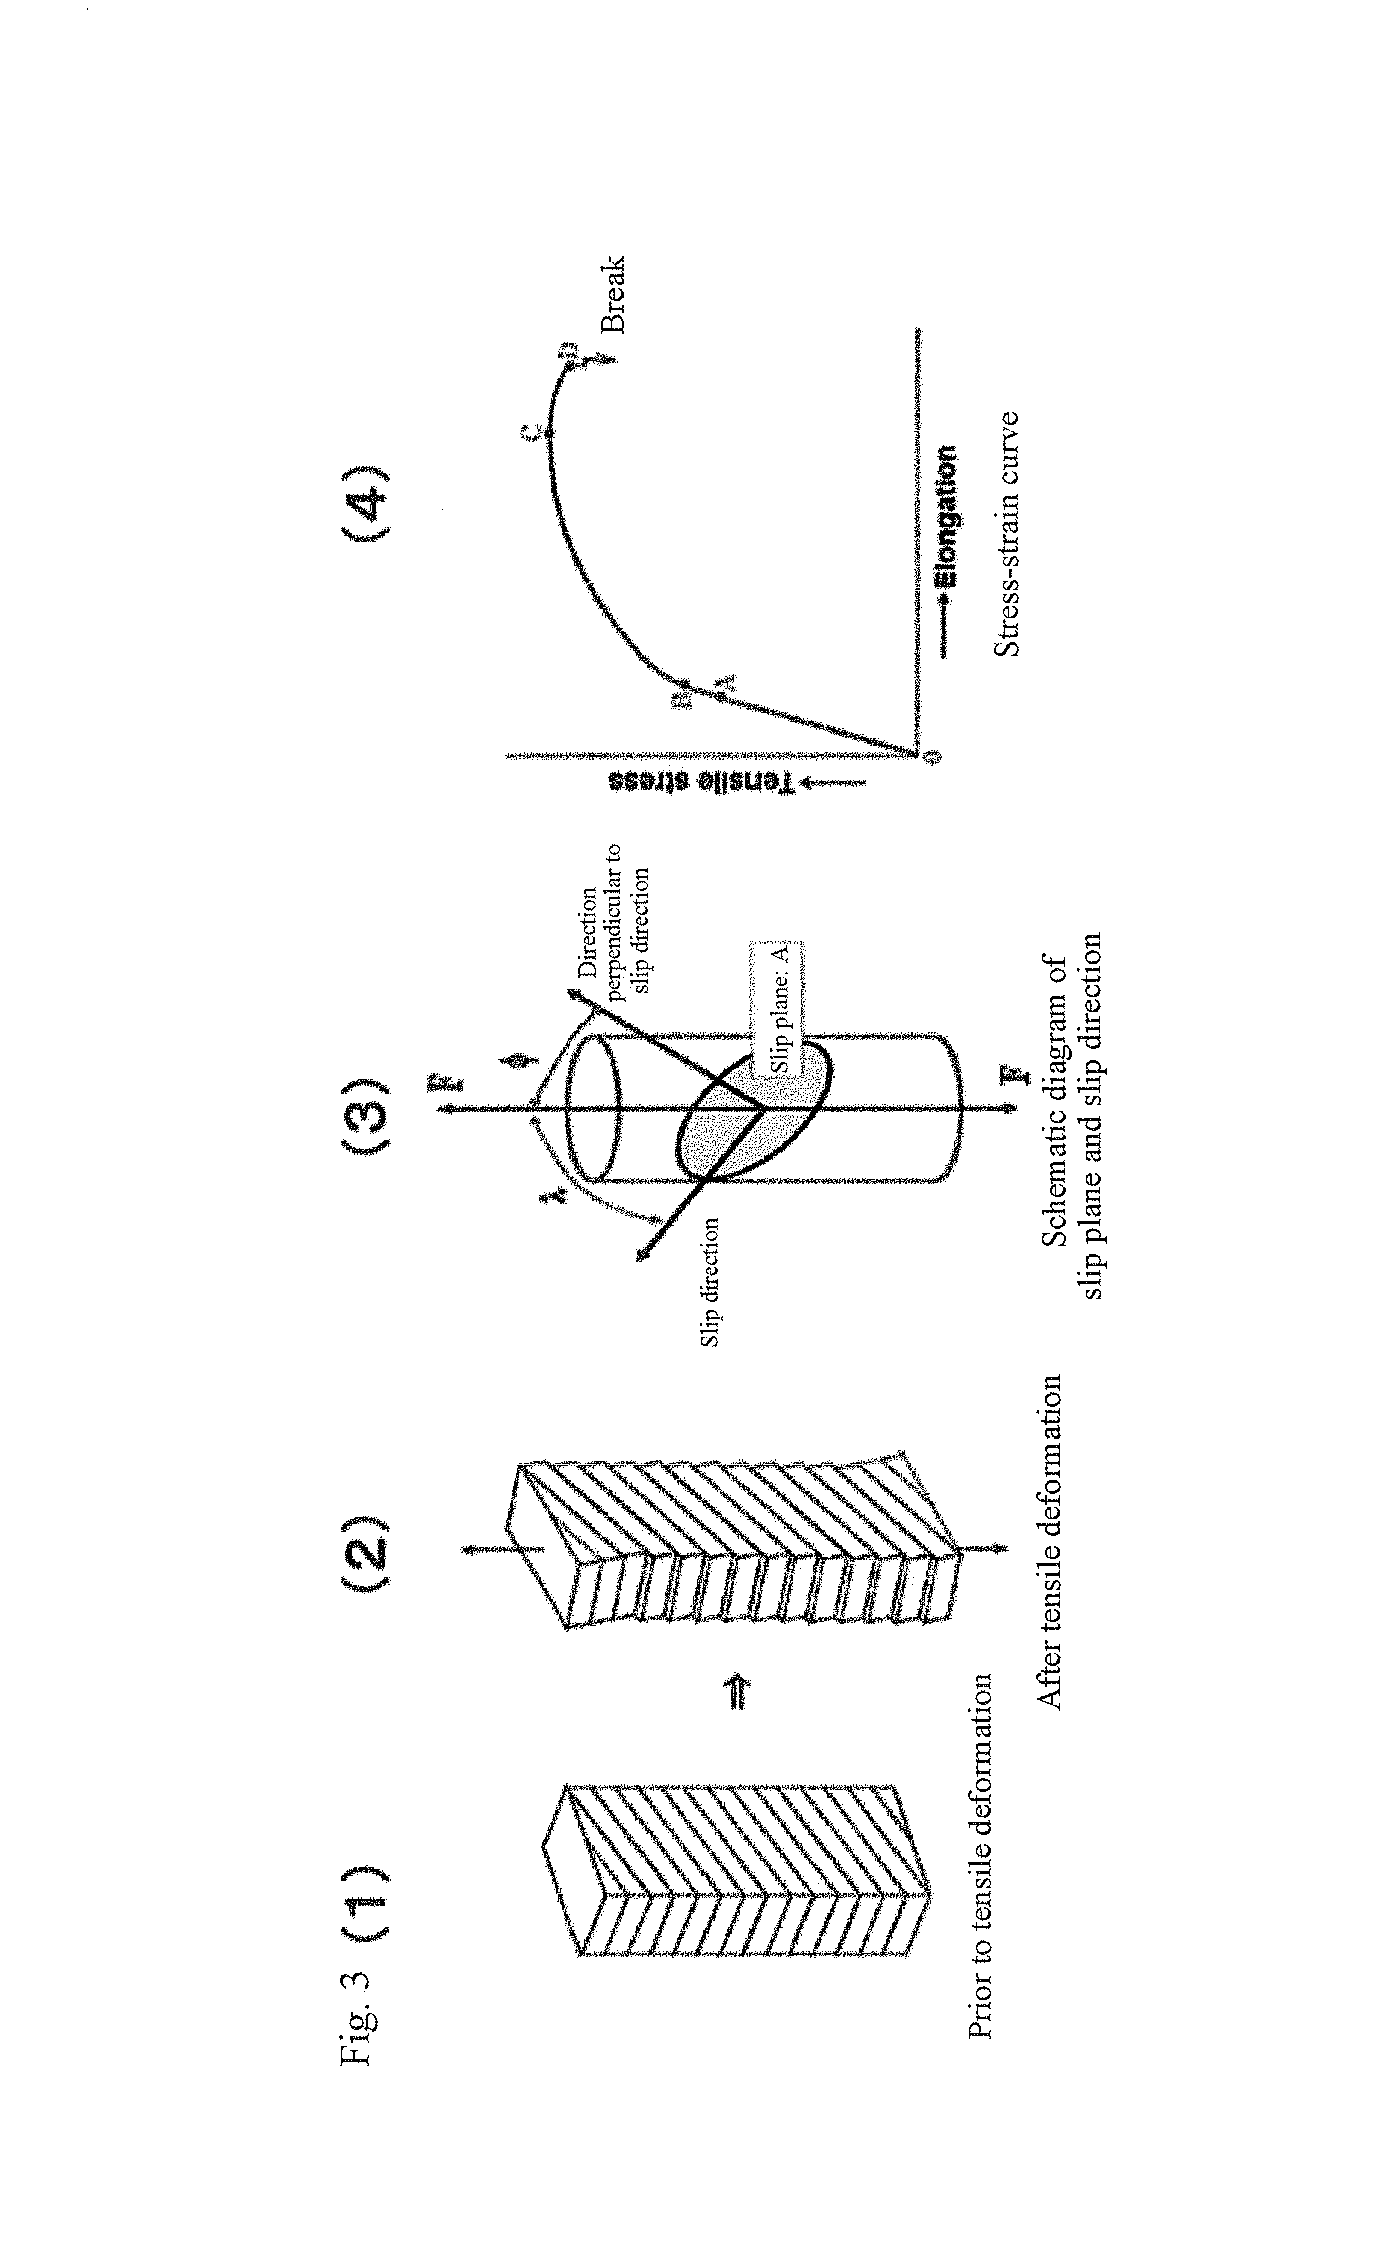 Method for manufacturing alloy containing transition metal carbide, tungsten alloy containing transition metal carbide, and alloy manufactured by said method